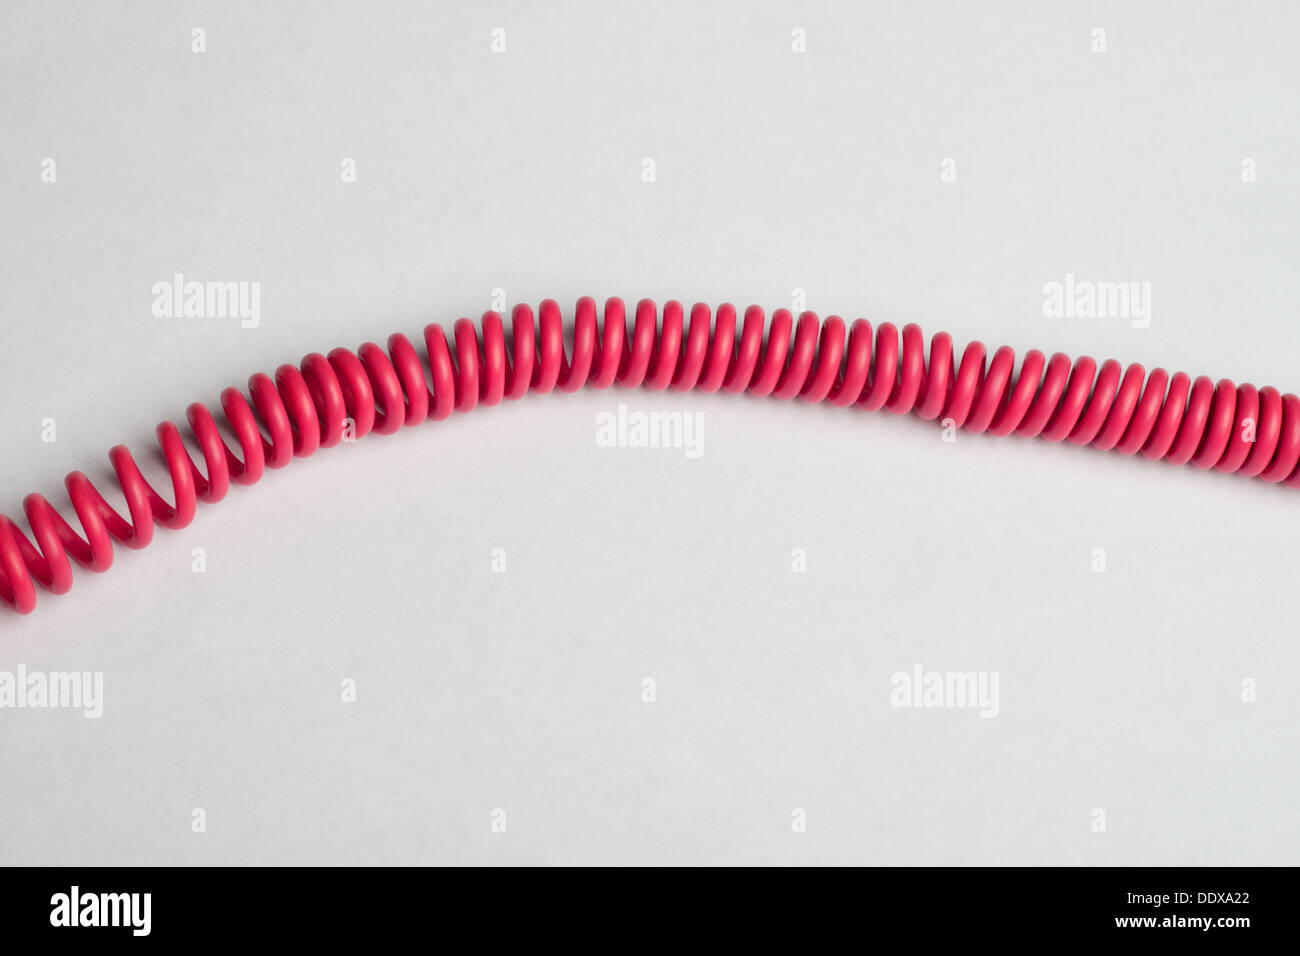 Pink phone cord on white surface Stock Photo